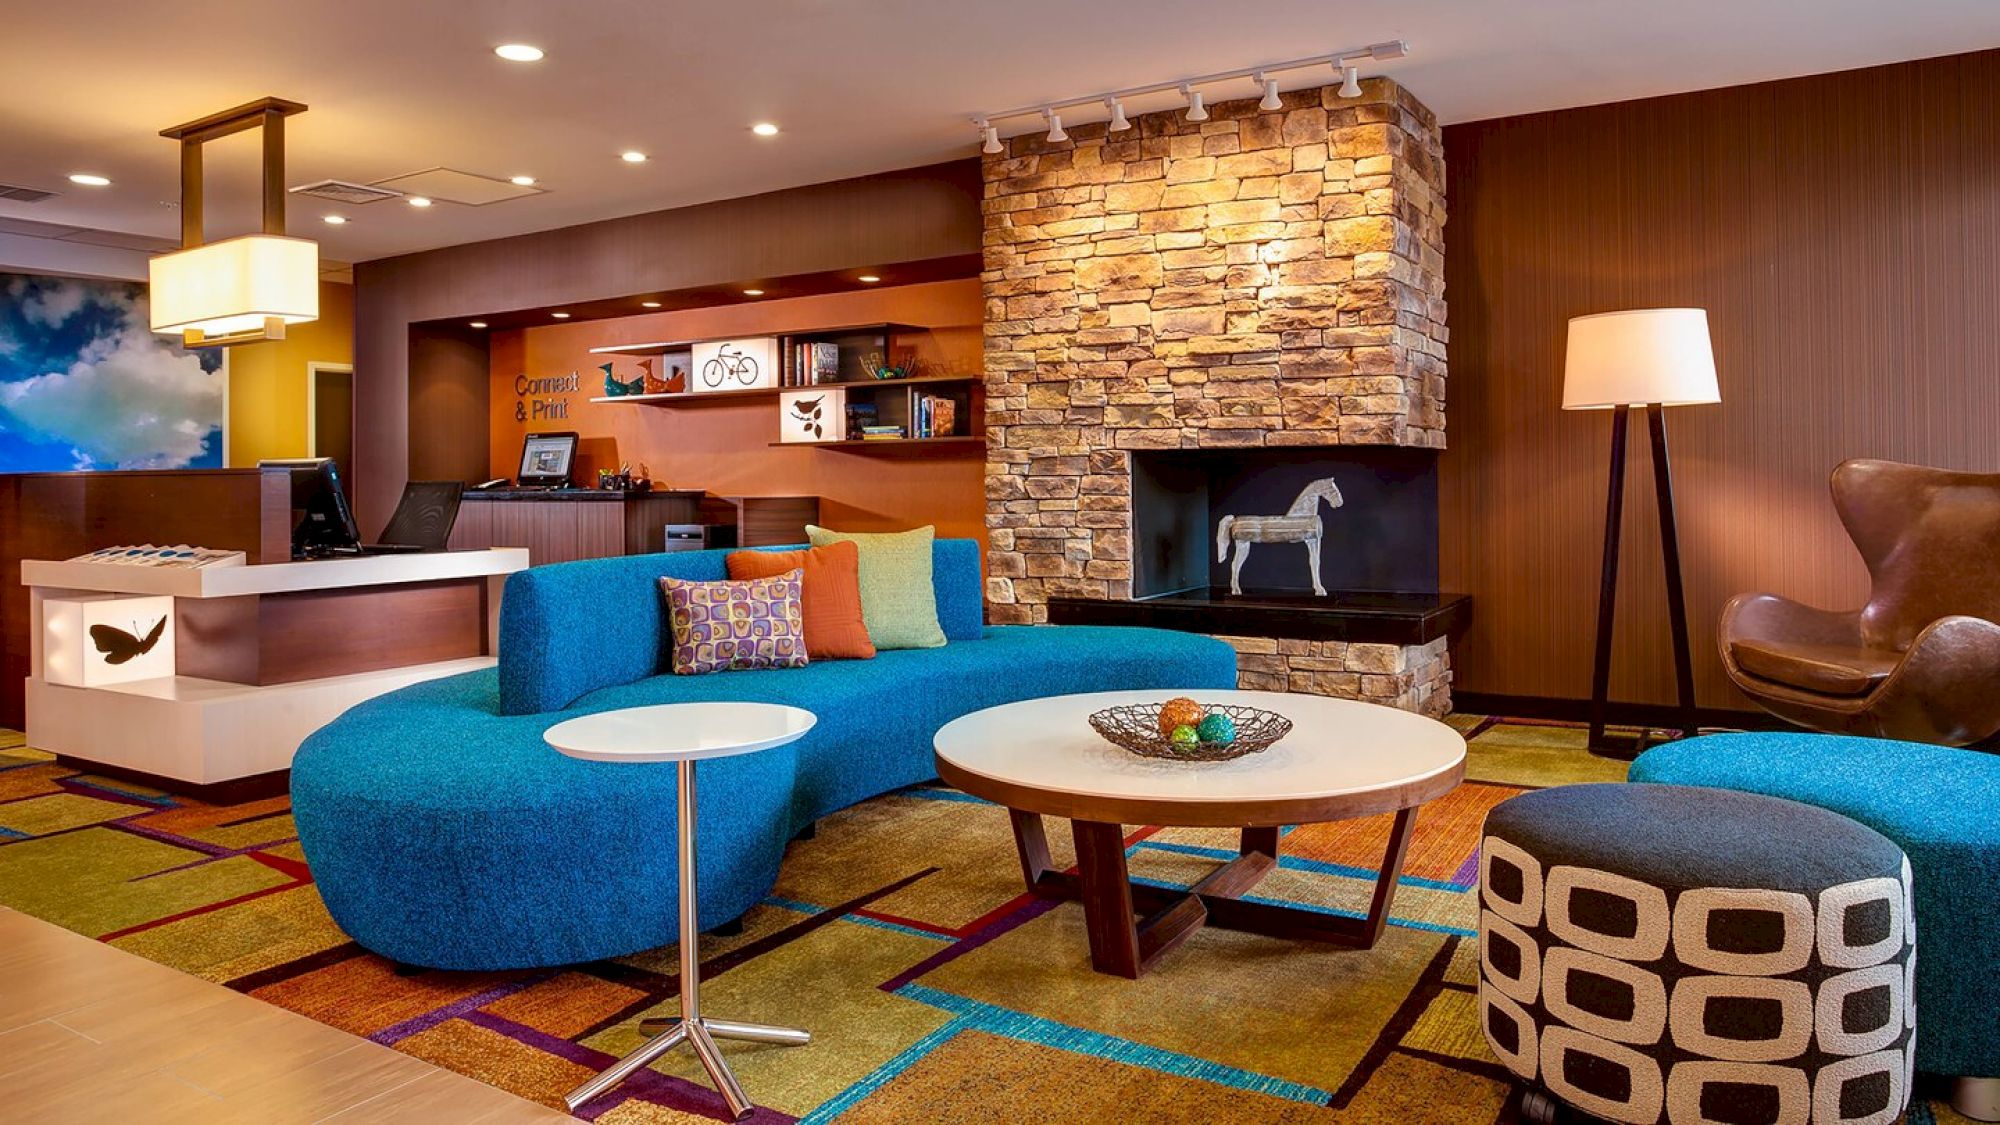 A modern lobby with a curved blue sofa, colorful carpet, stone fireplace, reception desk, and assorted decor. The atmosphere is cozy and welcoming.